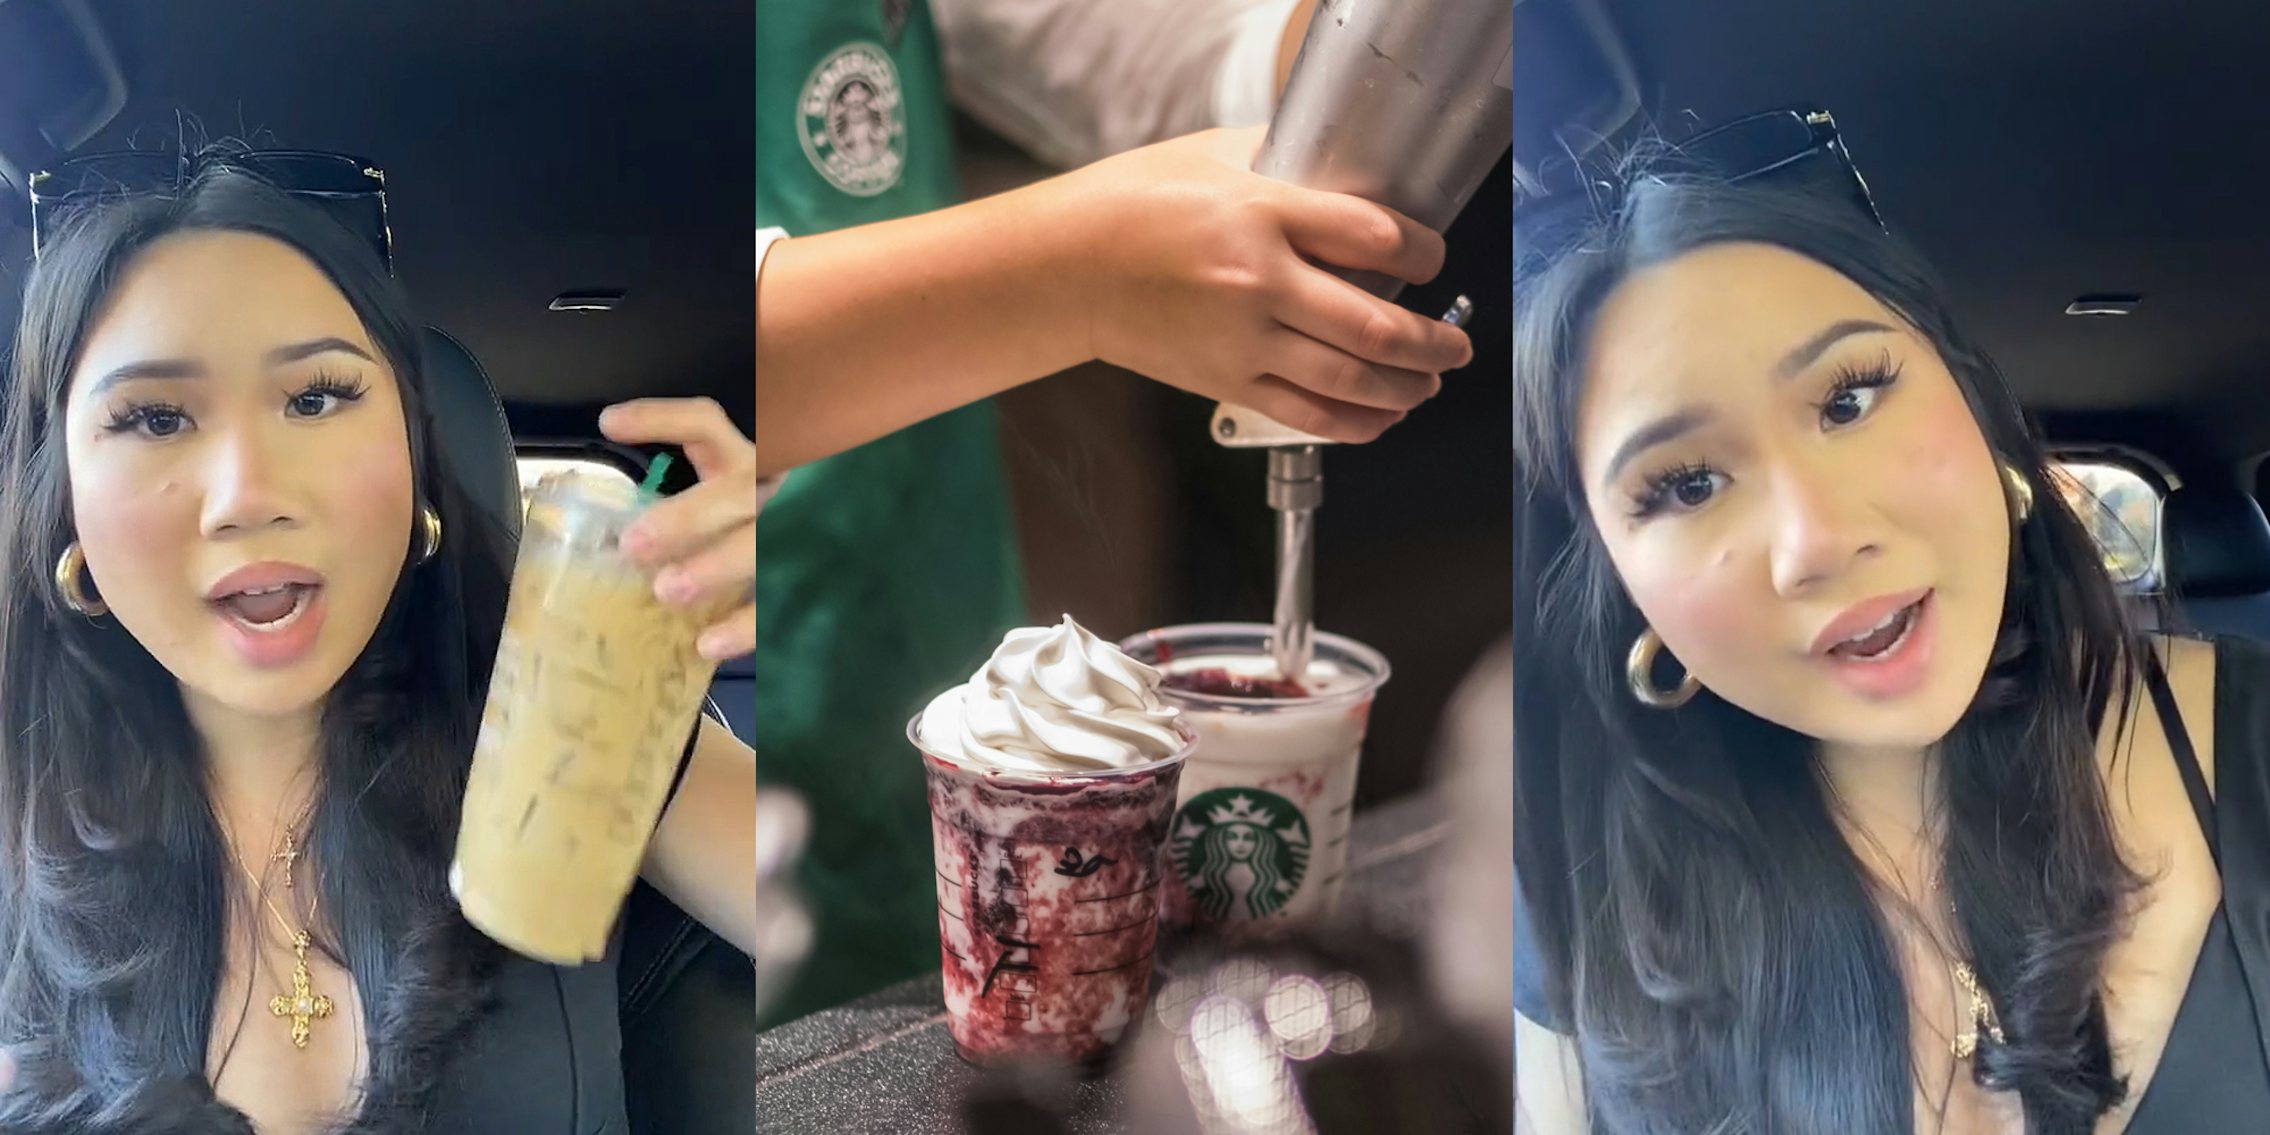 woman speaking in car holding up Starbucks drink (c) Starbucks barista making drinks (c) woman speaking with head tilted in car (r)